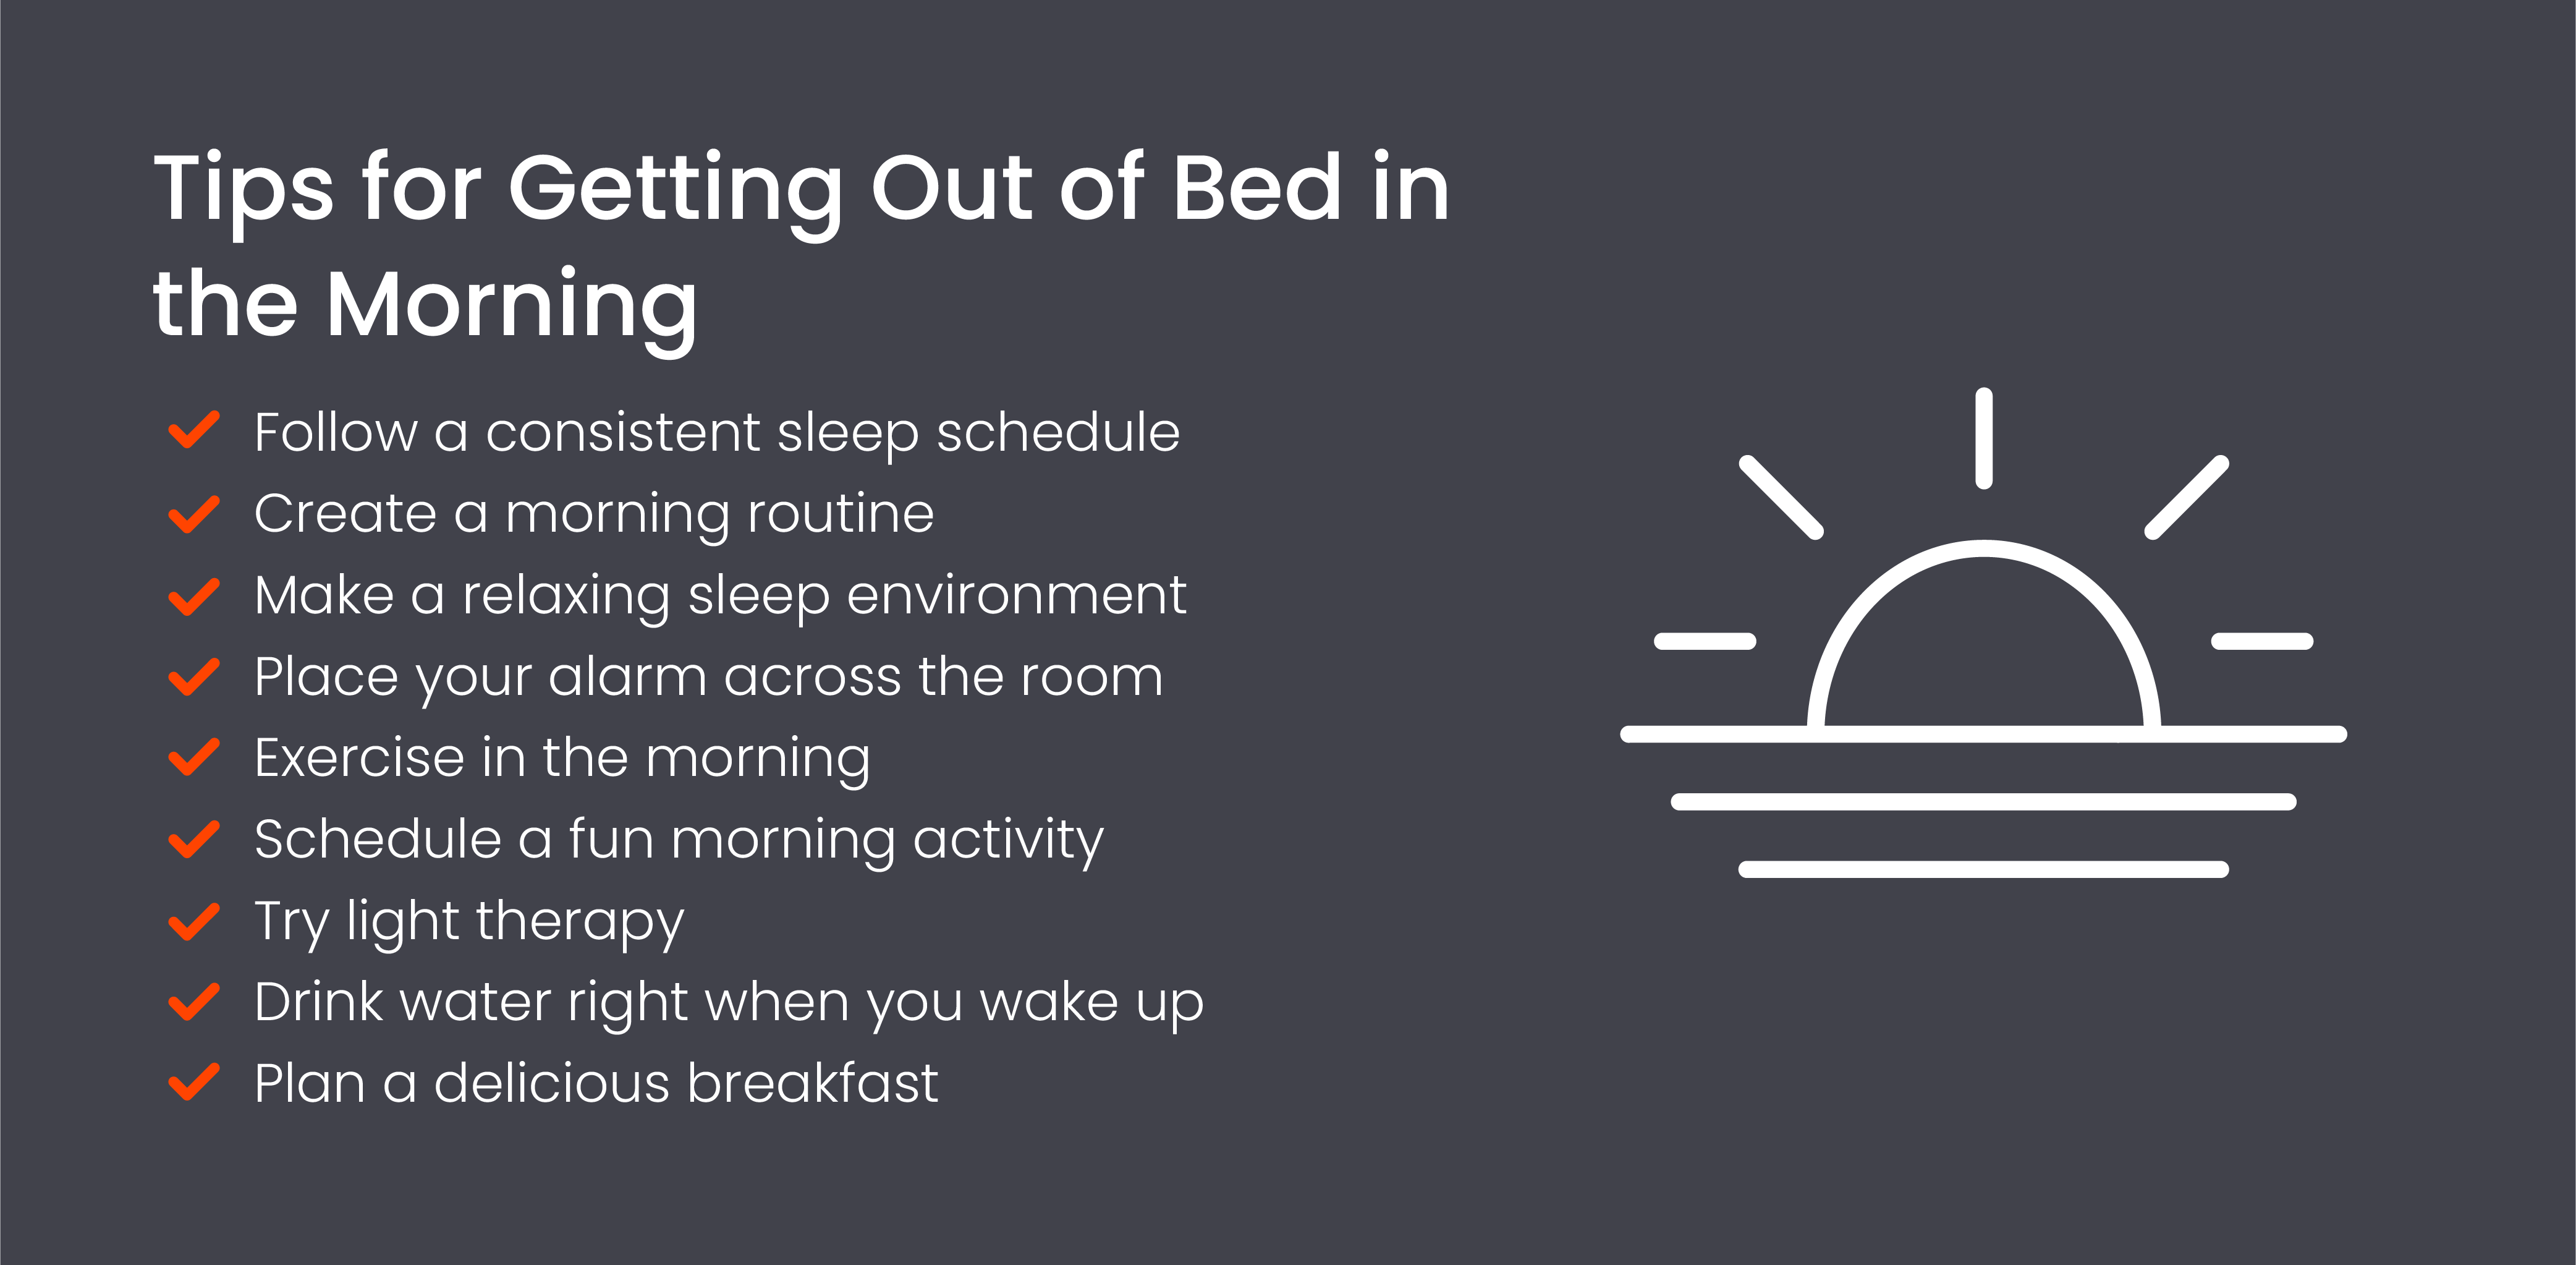 Tips for getting out of bed in the morning